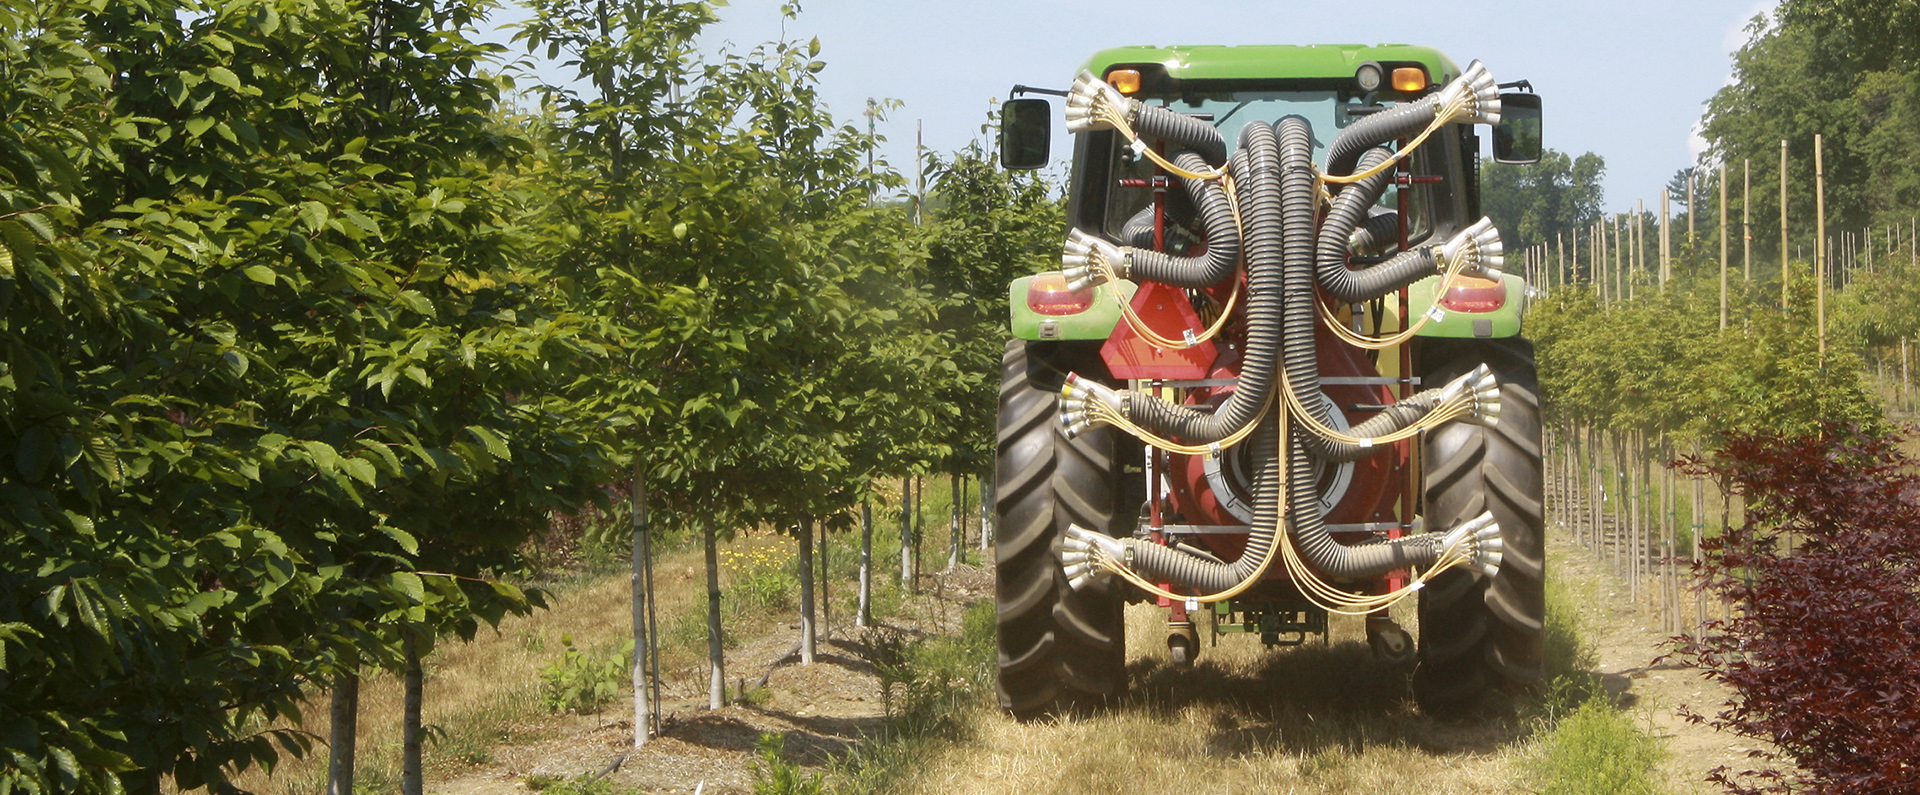 Precision sprayer in an orchard